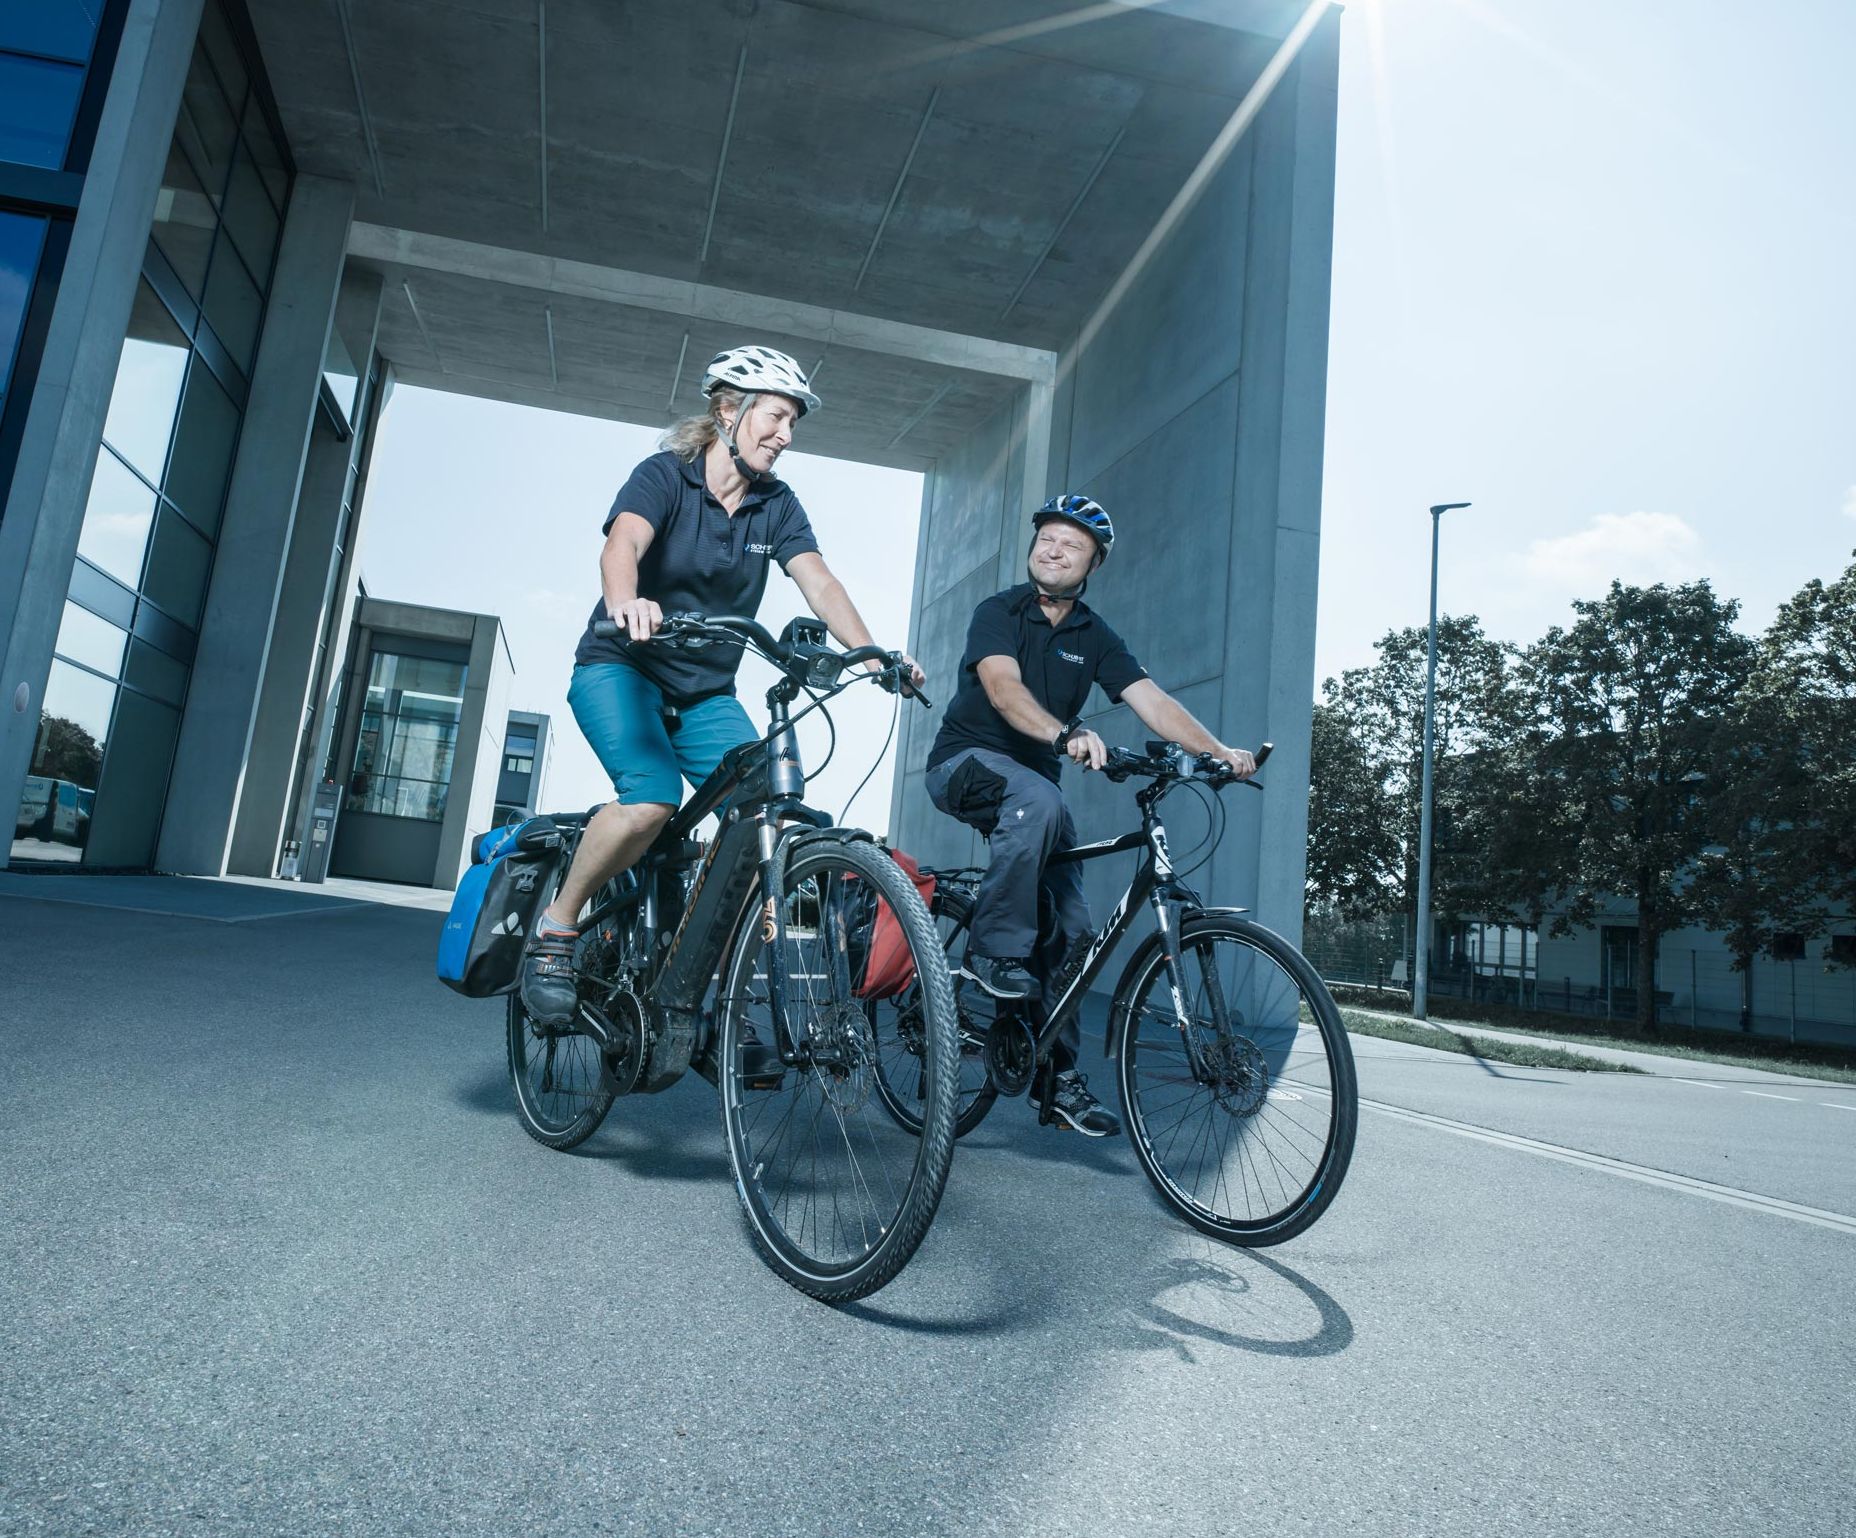 Two women ride off the site on an e-business bike 